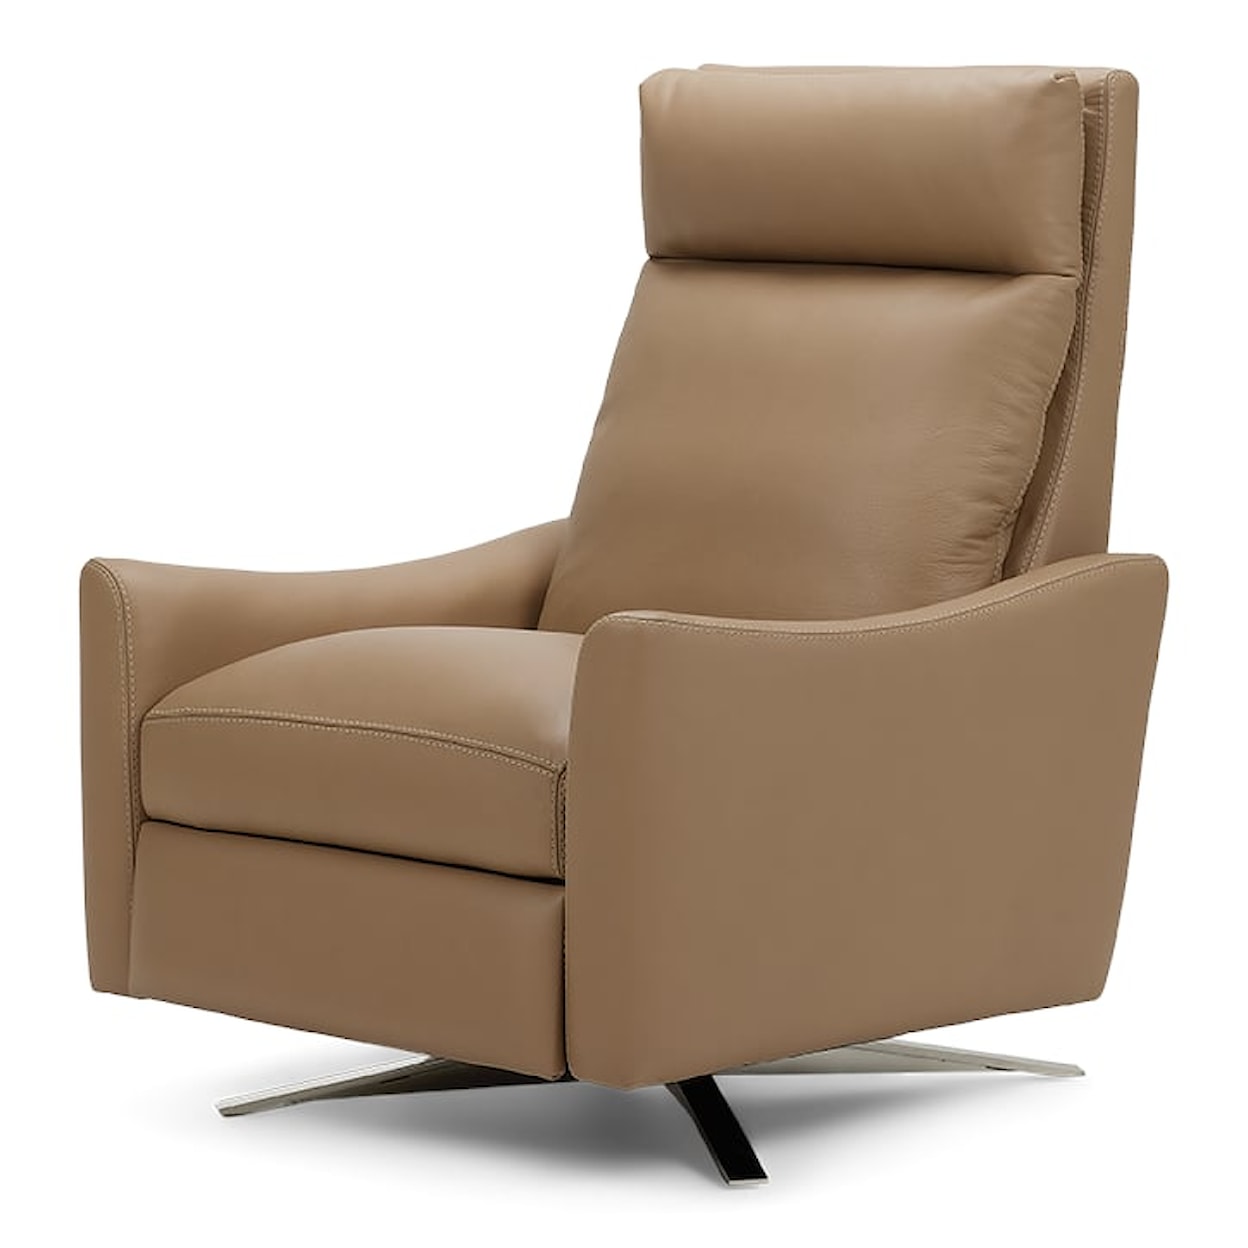 American Leather Ontario Ontario Comfort Air X-Large Chair